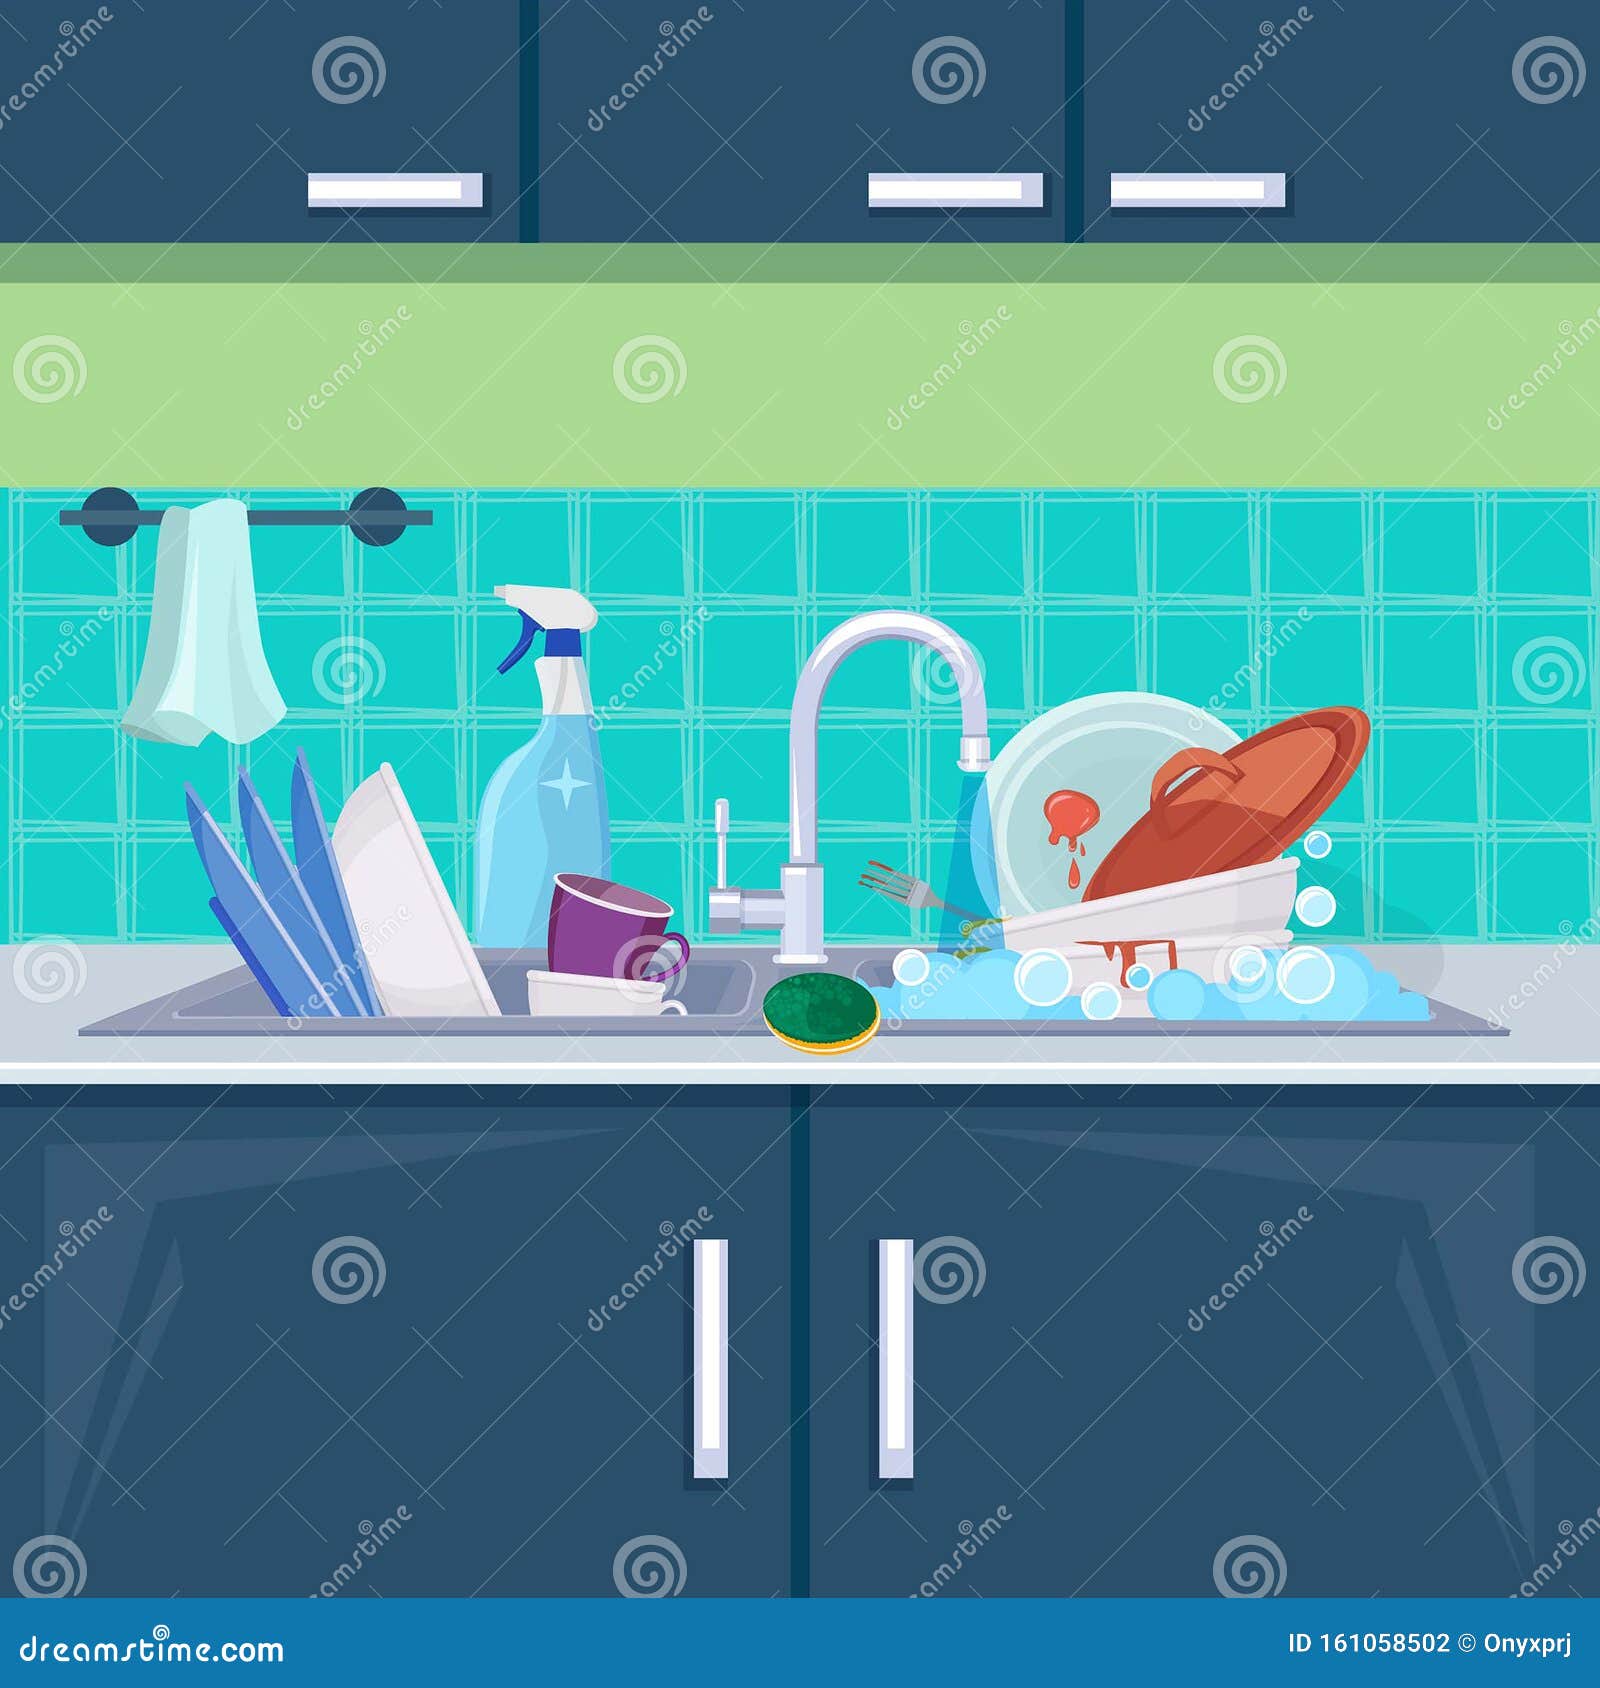 Kitchen Sink Dirty Dishes. Background with Plates Bowls Mugs for Water  Cleaning Vector Cartoon Illustration Stock Vector - Illustration of  kitchenware, group: 161058502